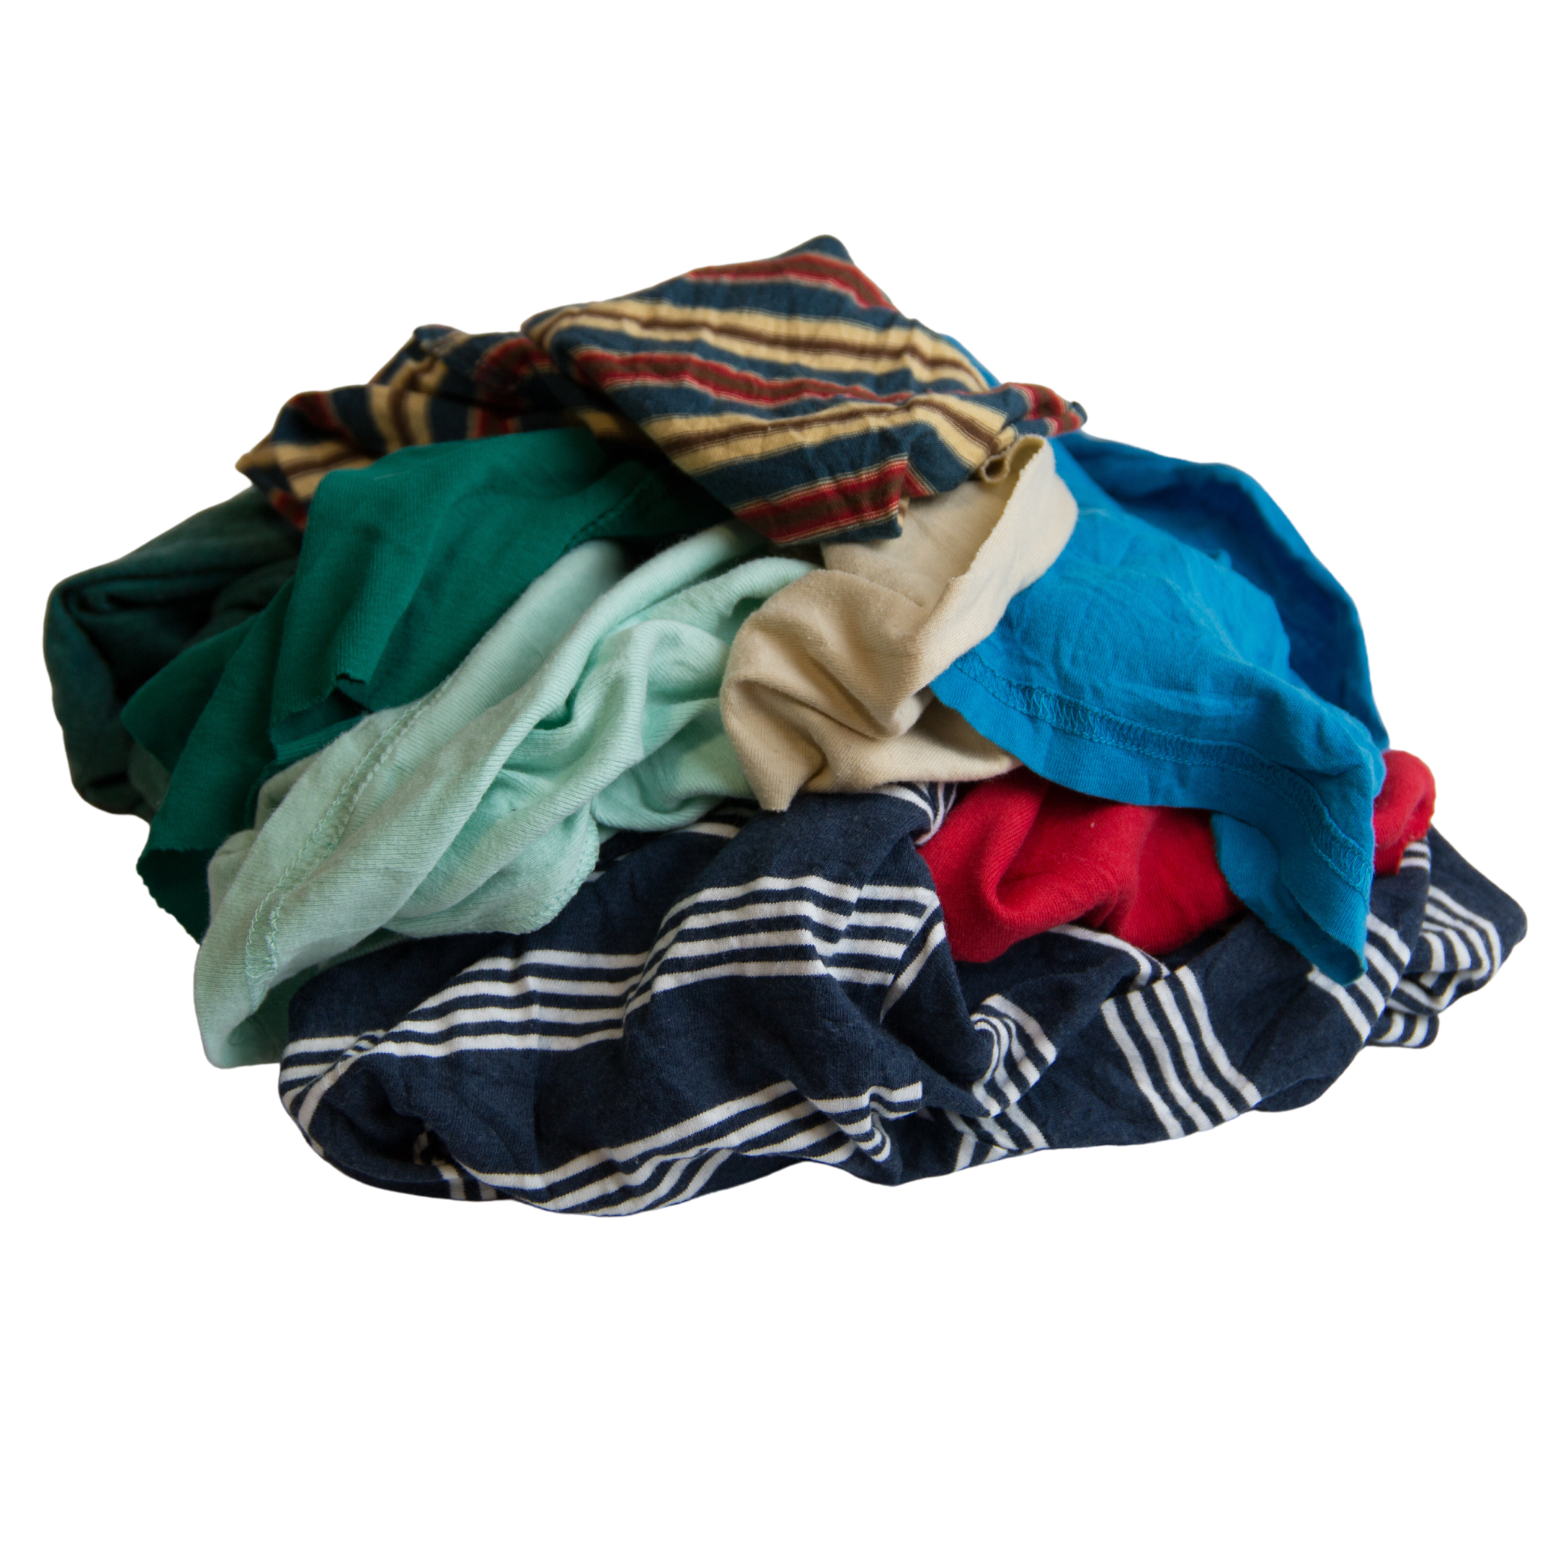 Reclaimed Colored Knit Rags